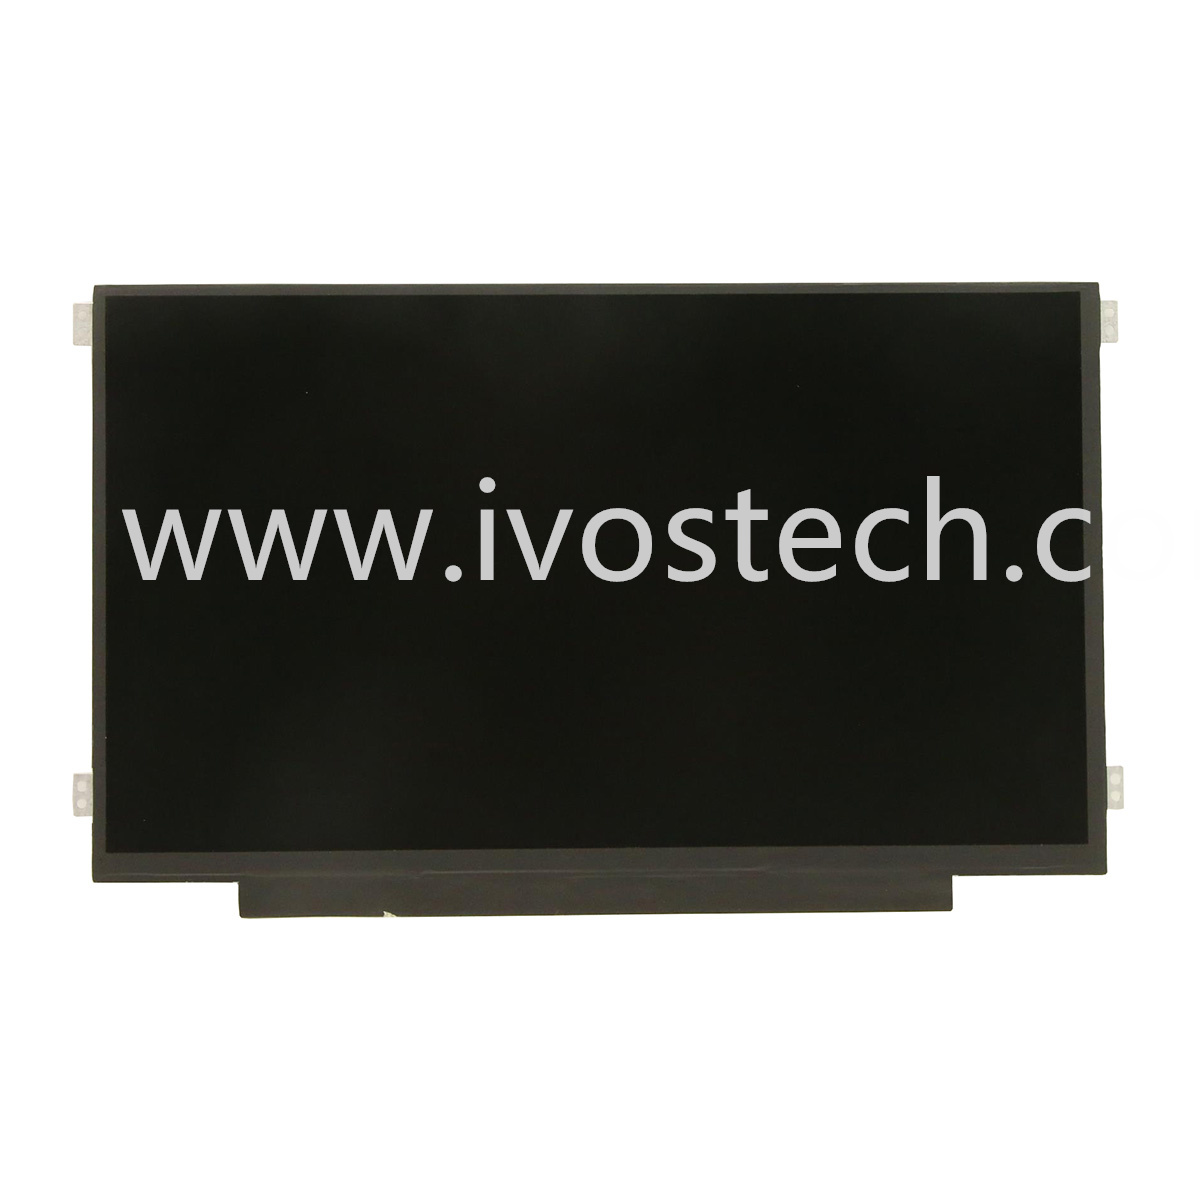 NT116WHM-N42 11.6” HD 1366×768 30 Pin Laptop LCD Screen Replacement Display for Lenovo Chromebook 11 100e 1st Gen